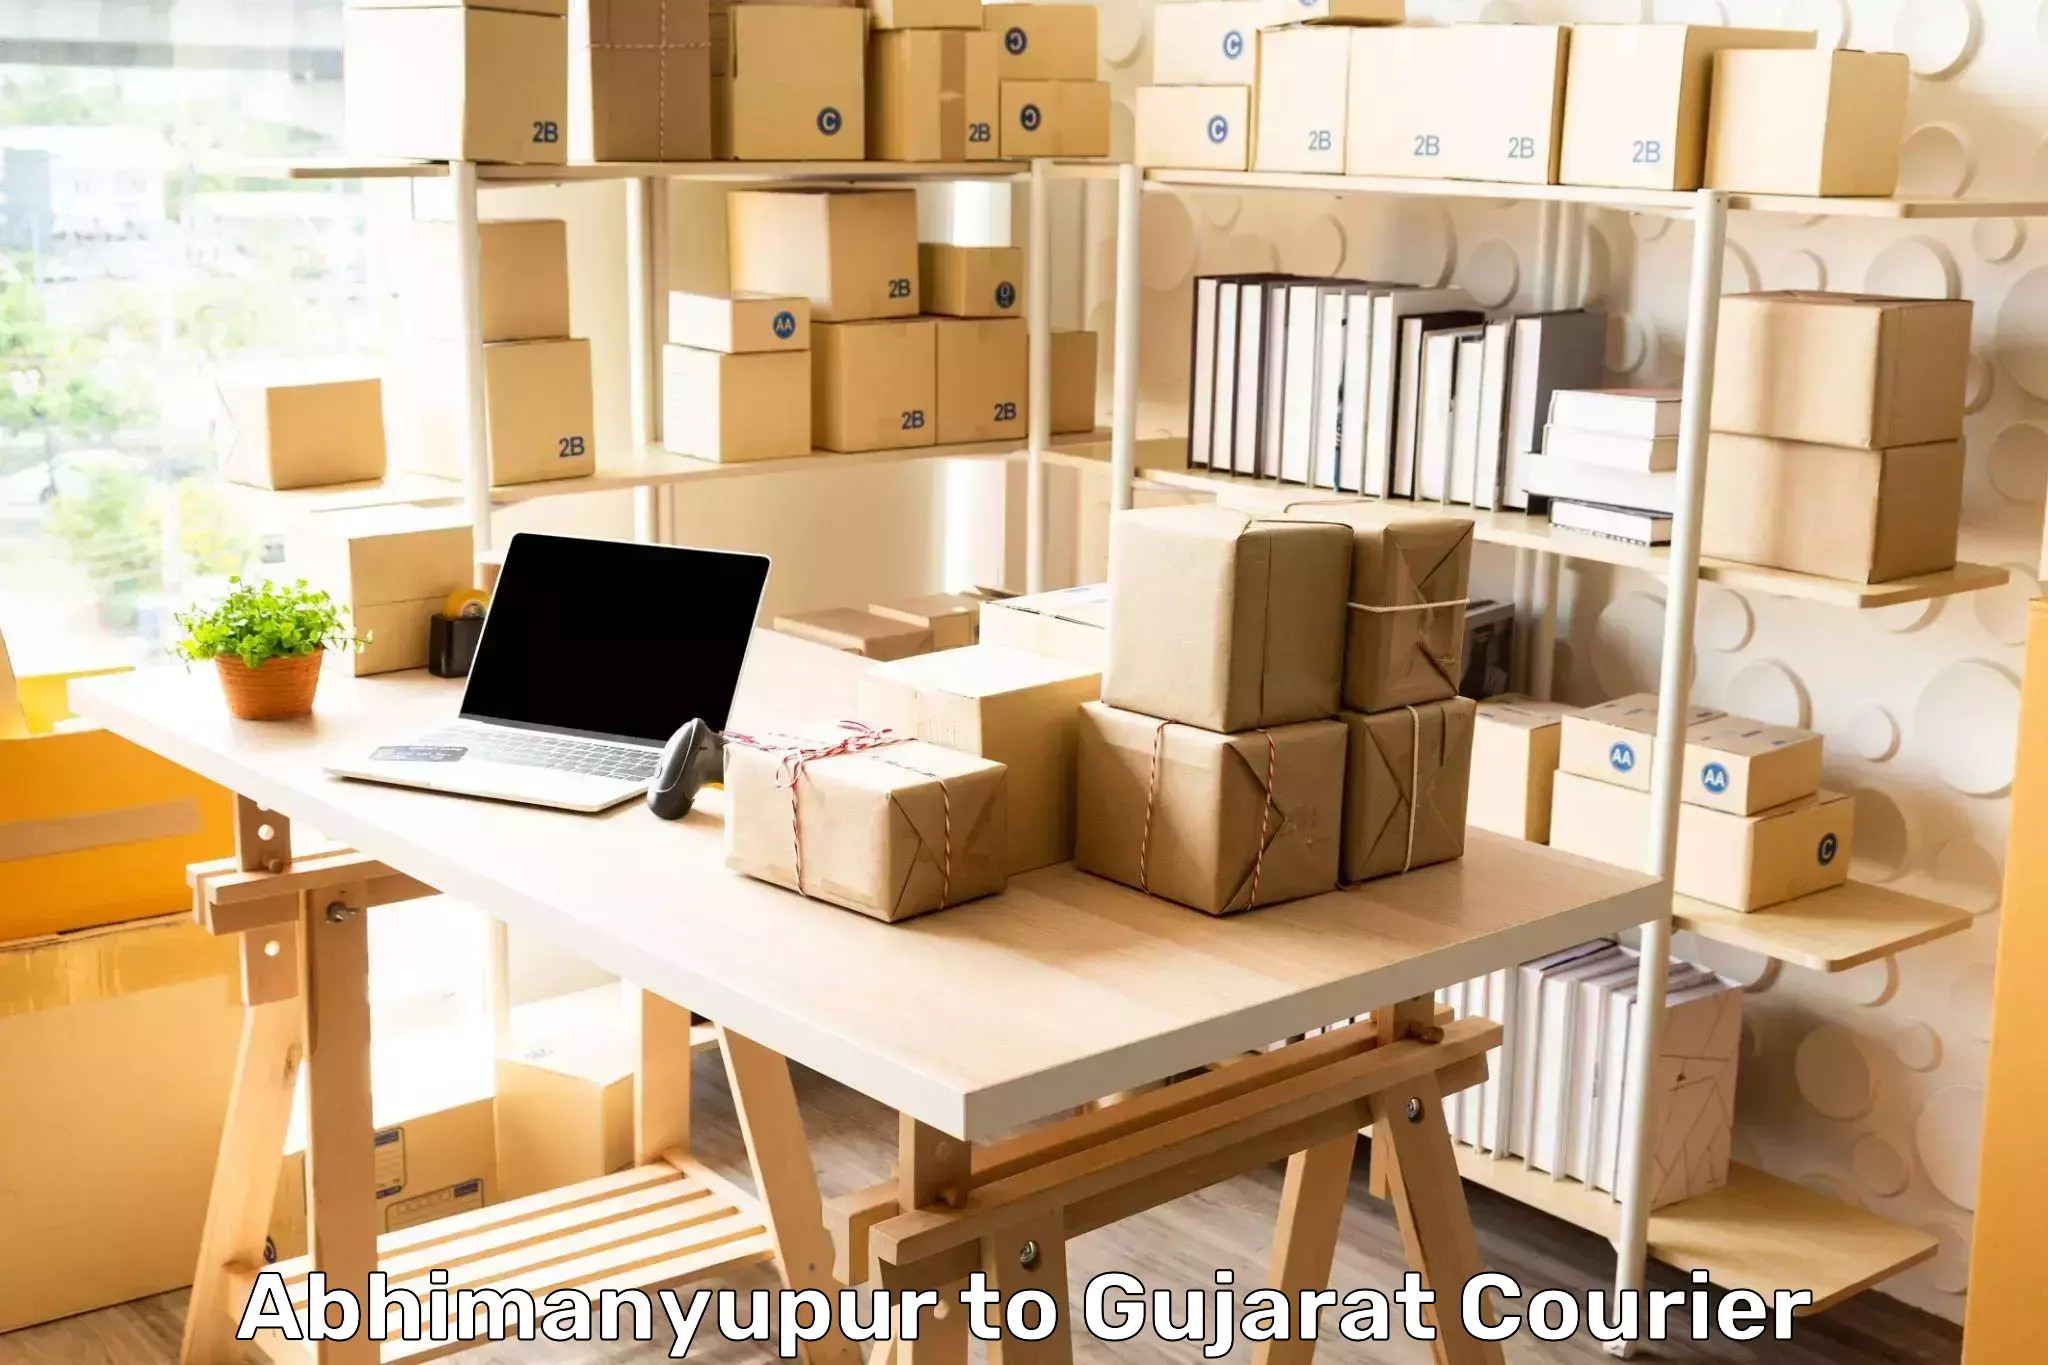 On-call courier service Abhimanyupur to Navsari